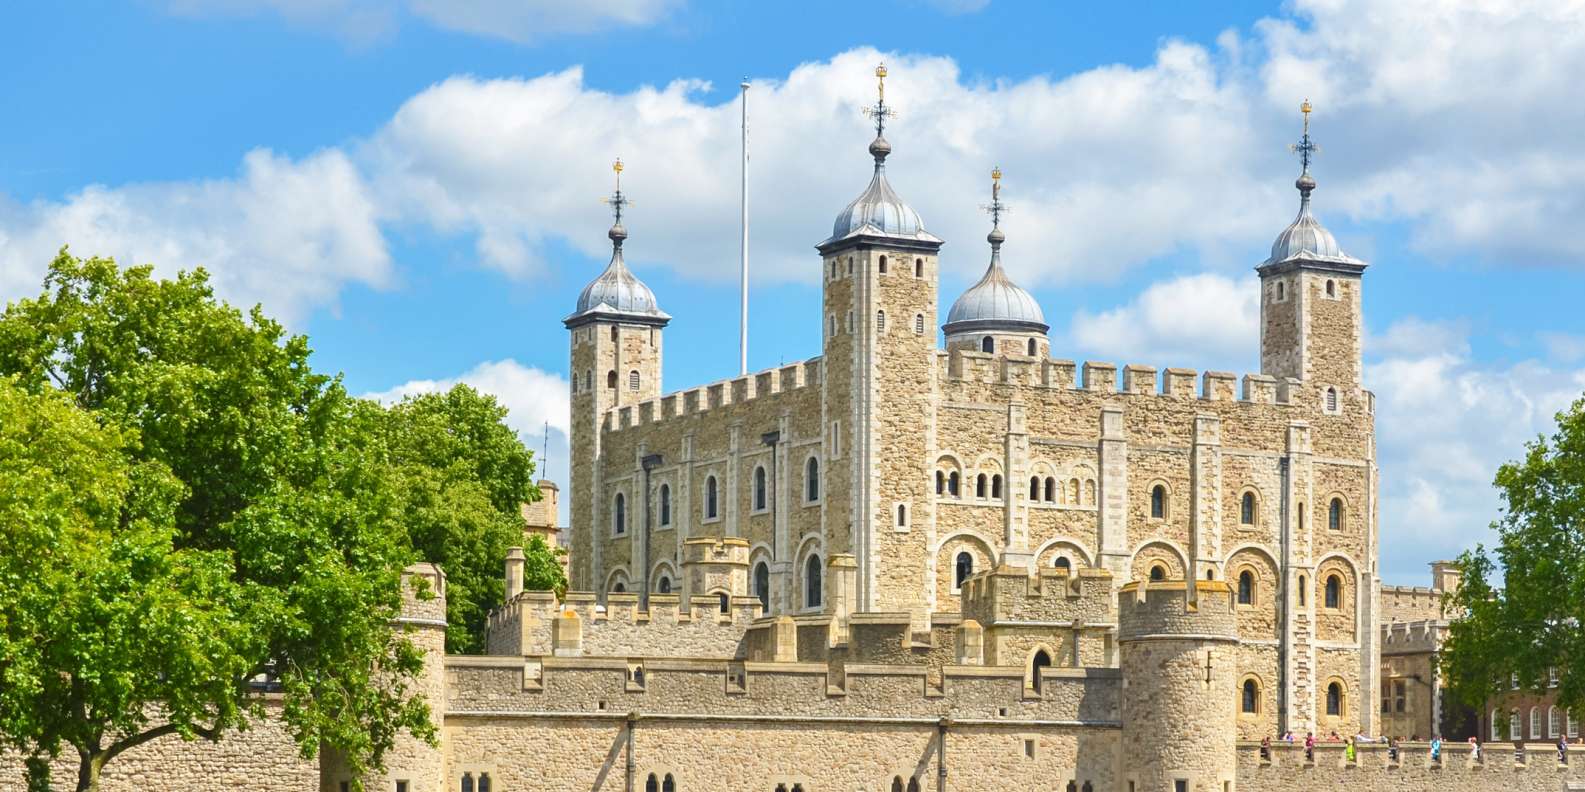 Tower of London, London - Book Tickets & Tours | GetYourGuide